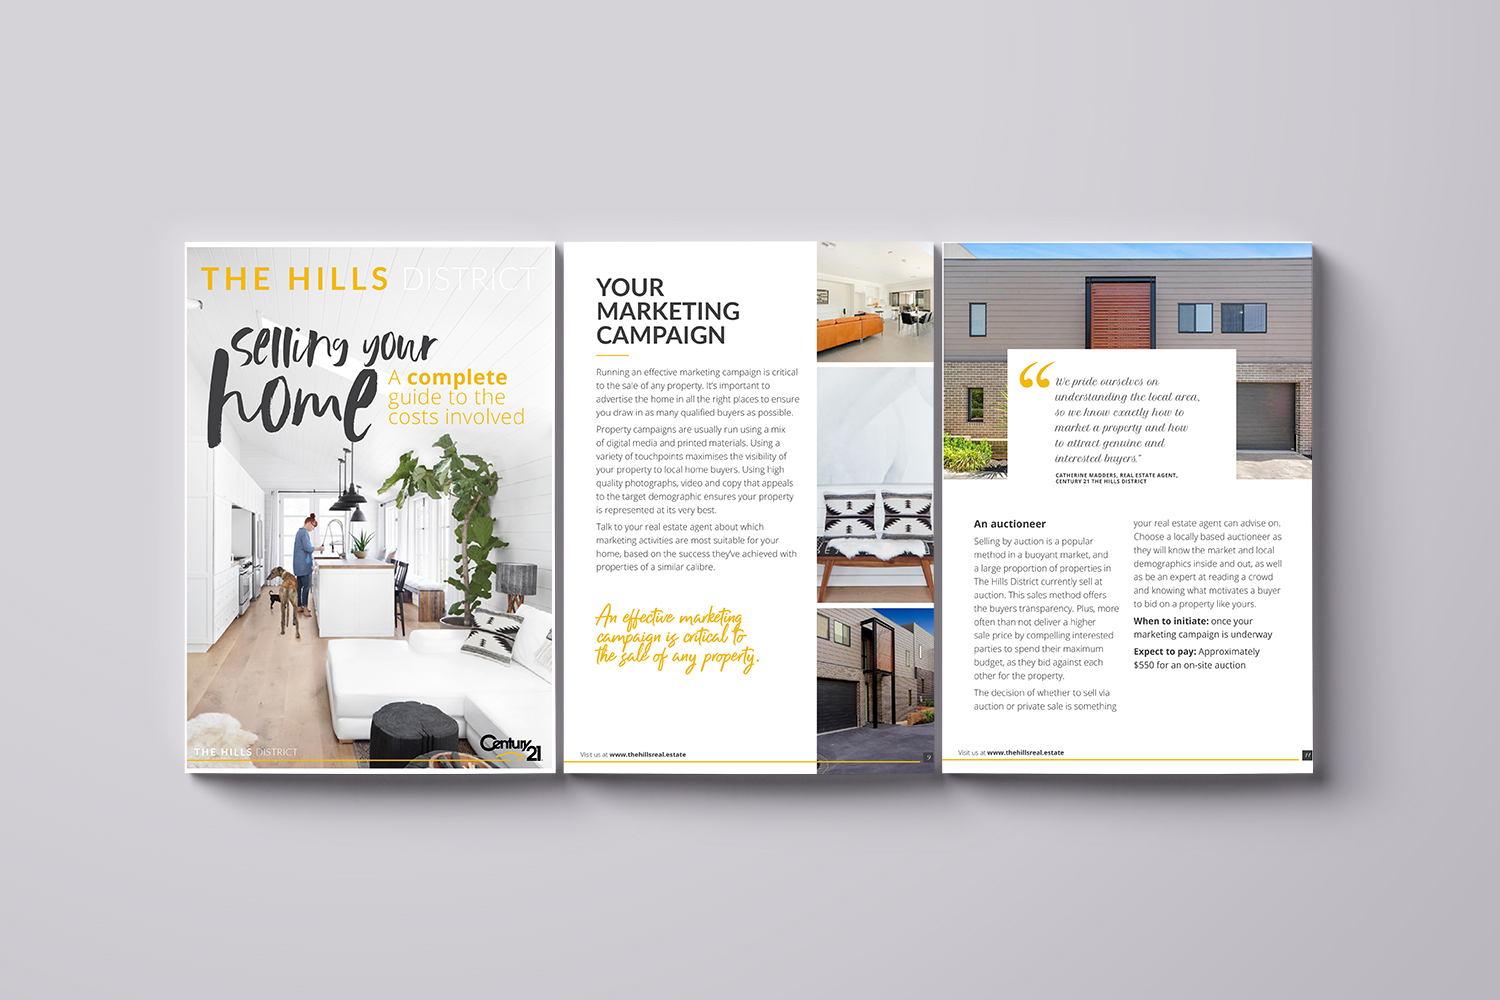 The Hills District – Century 21 Online Guide Design for Hoole.co